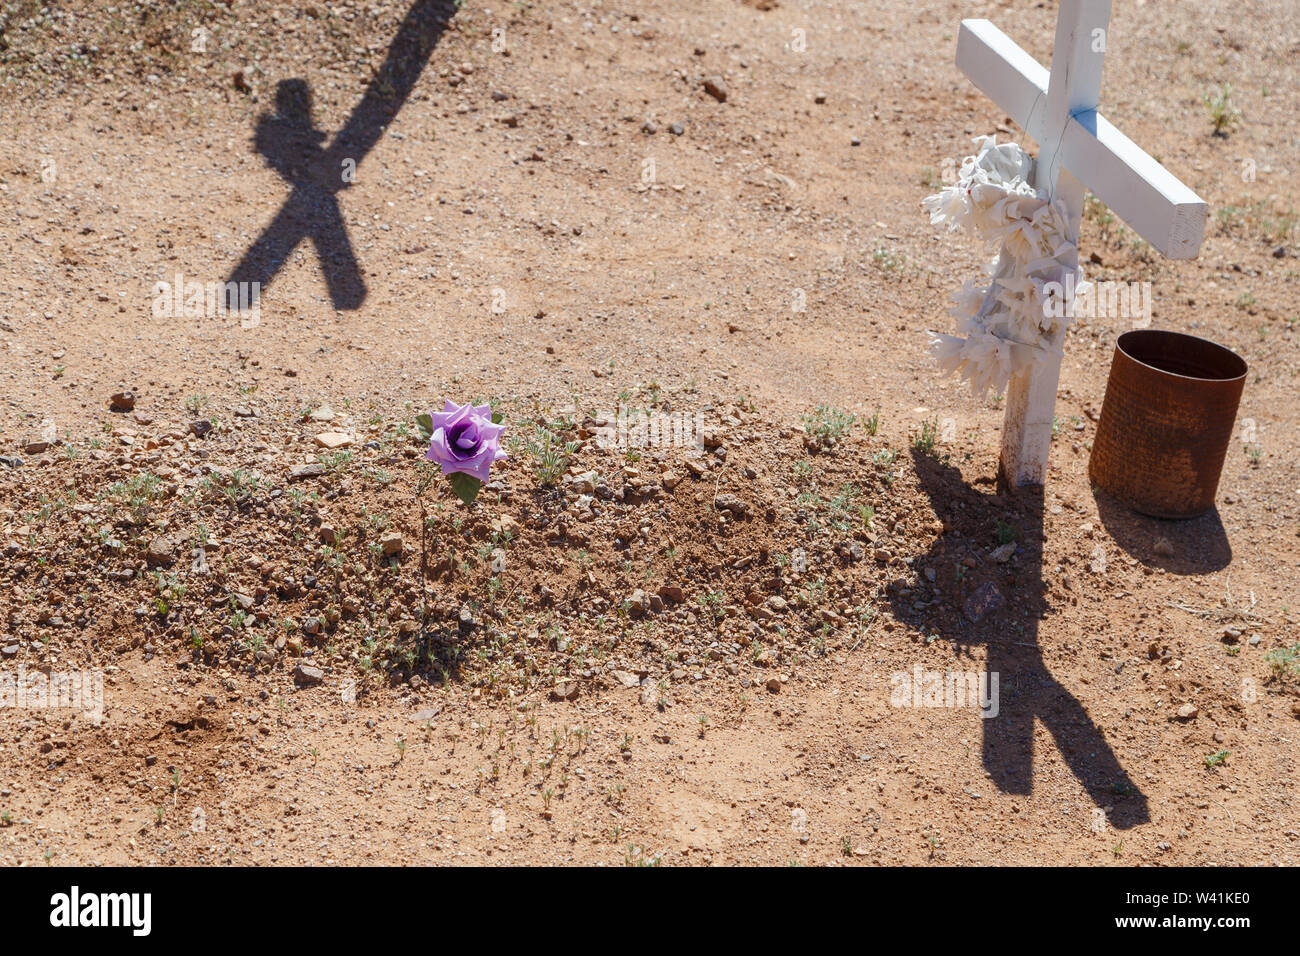 Artificial flowers and crosses are placed on unmarked graves of migrants died while trying to cross Sonoran desert in Southern Arizona, USA. Stock Photo